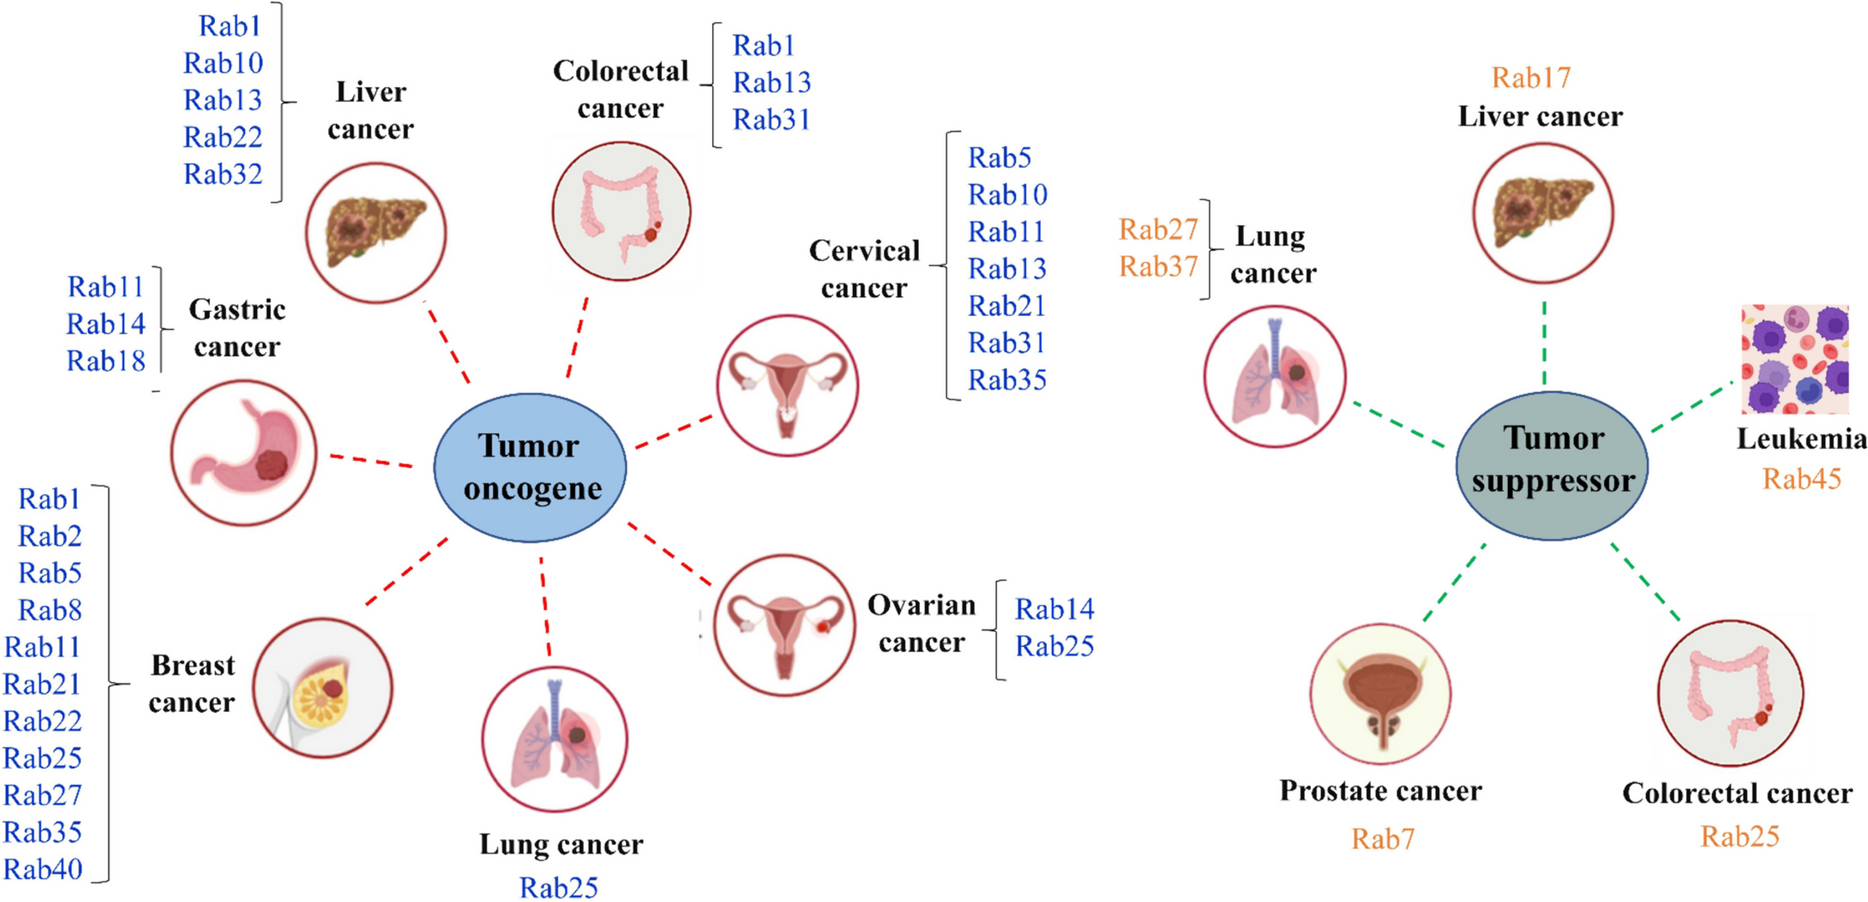 Function and regulation of Rab GTPases in cancers